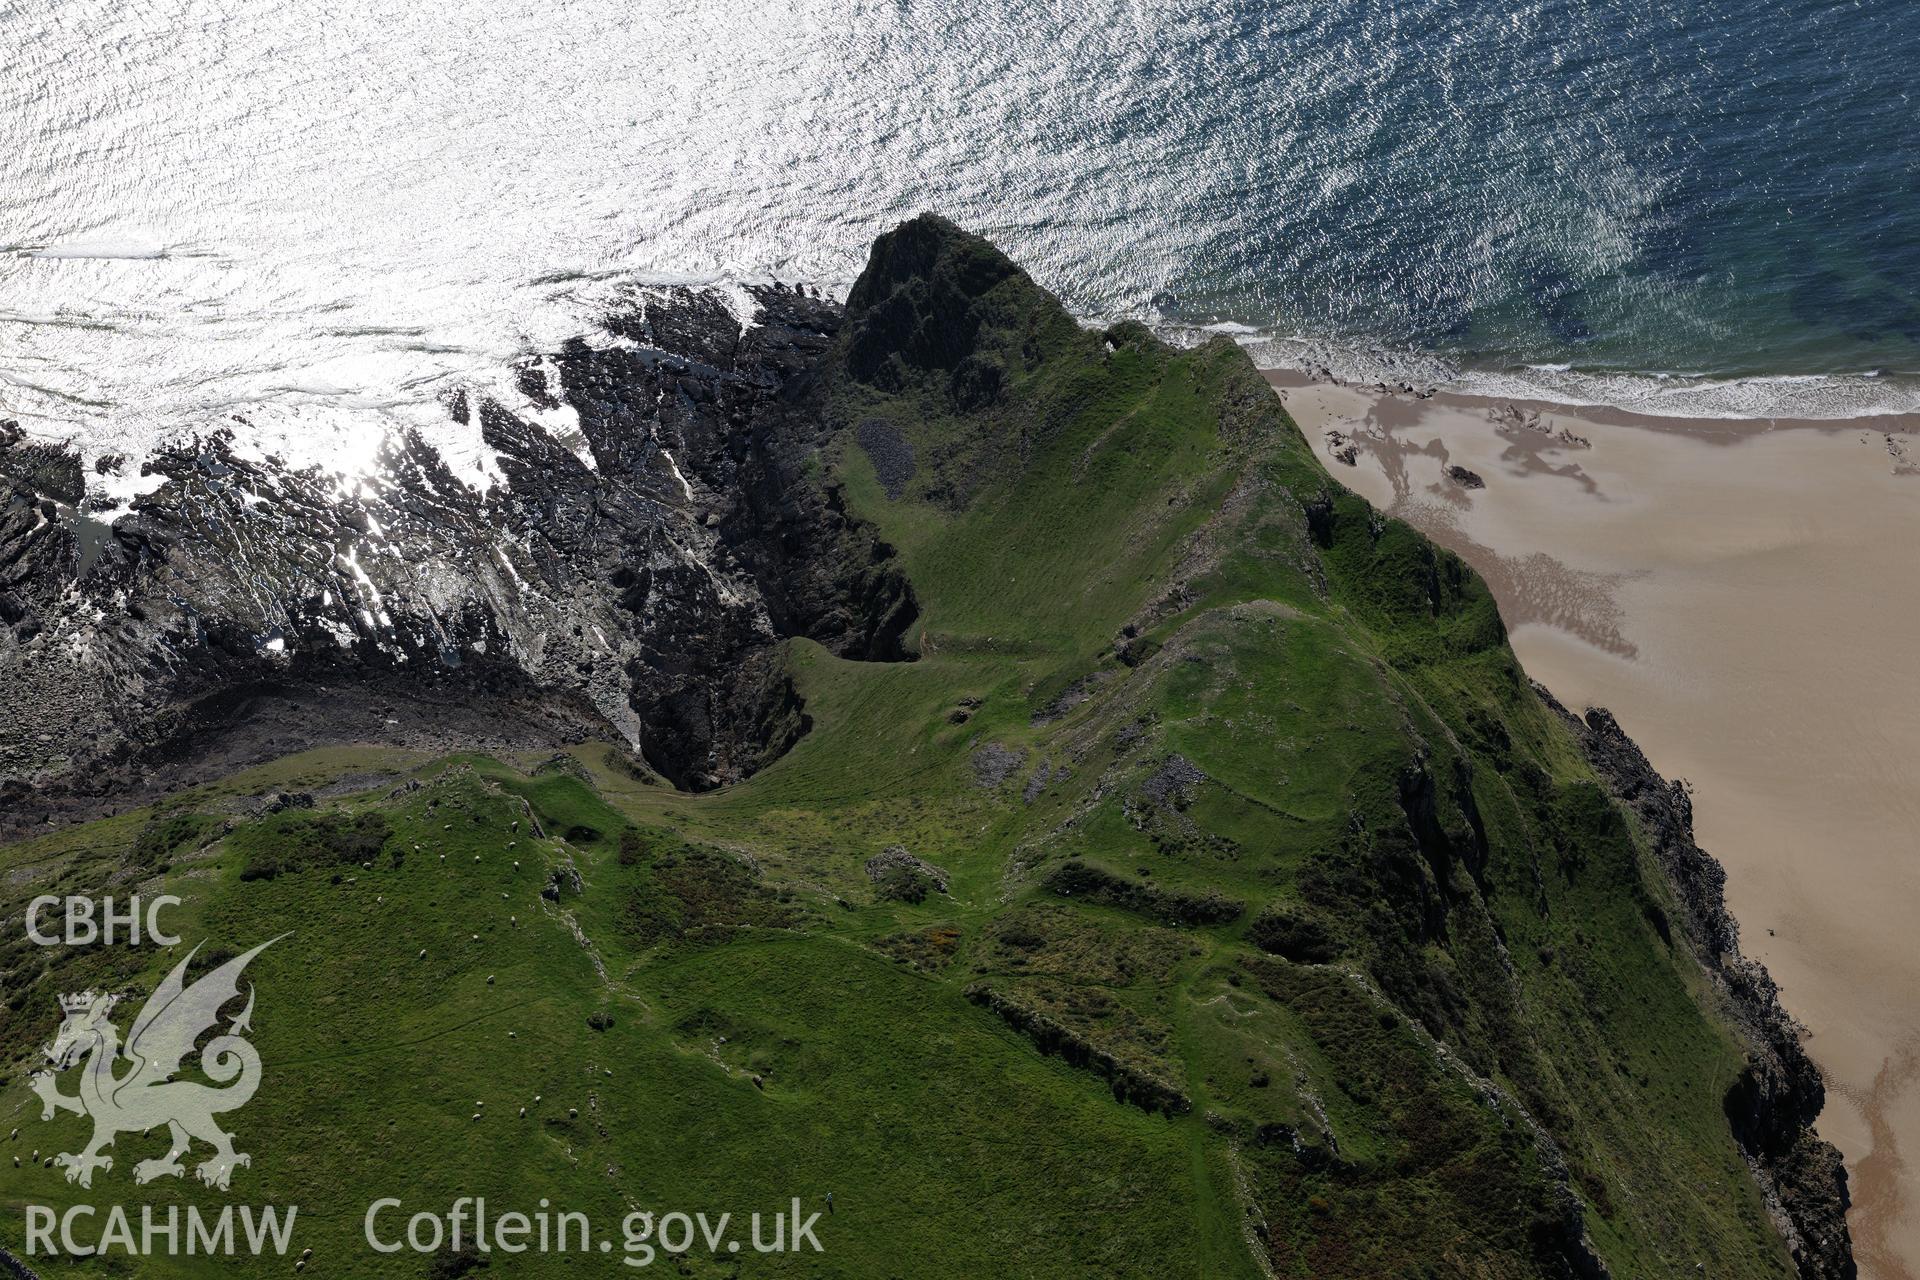 Thurba Camp defended enclosure, south of Rhossili, on the south western coast of the Gower Peninsula. Oblique aerial photograph taken during the Royal Commission's programme of archaeological aerial reconnaissance by Toby Driver on 30th September 2015.